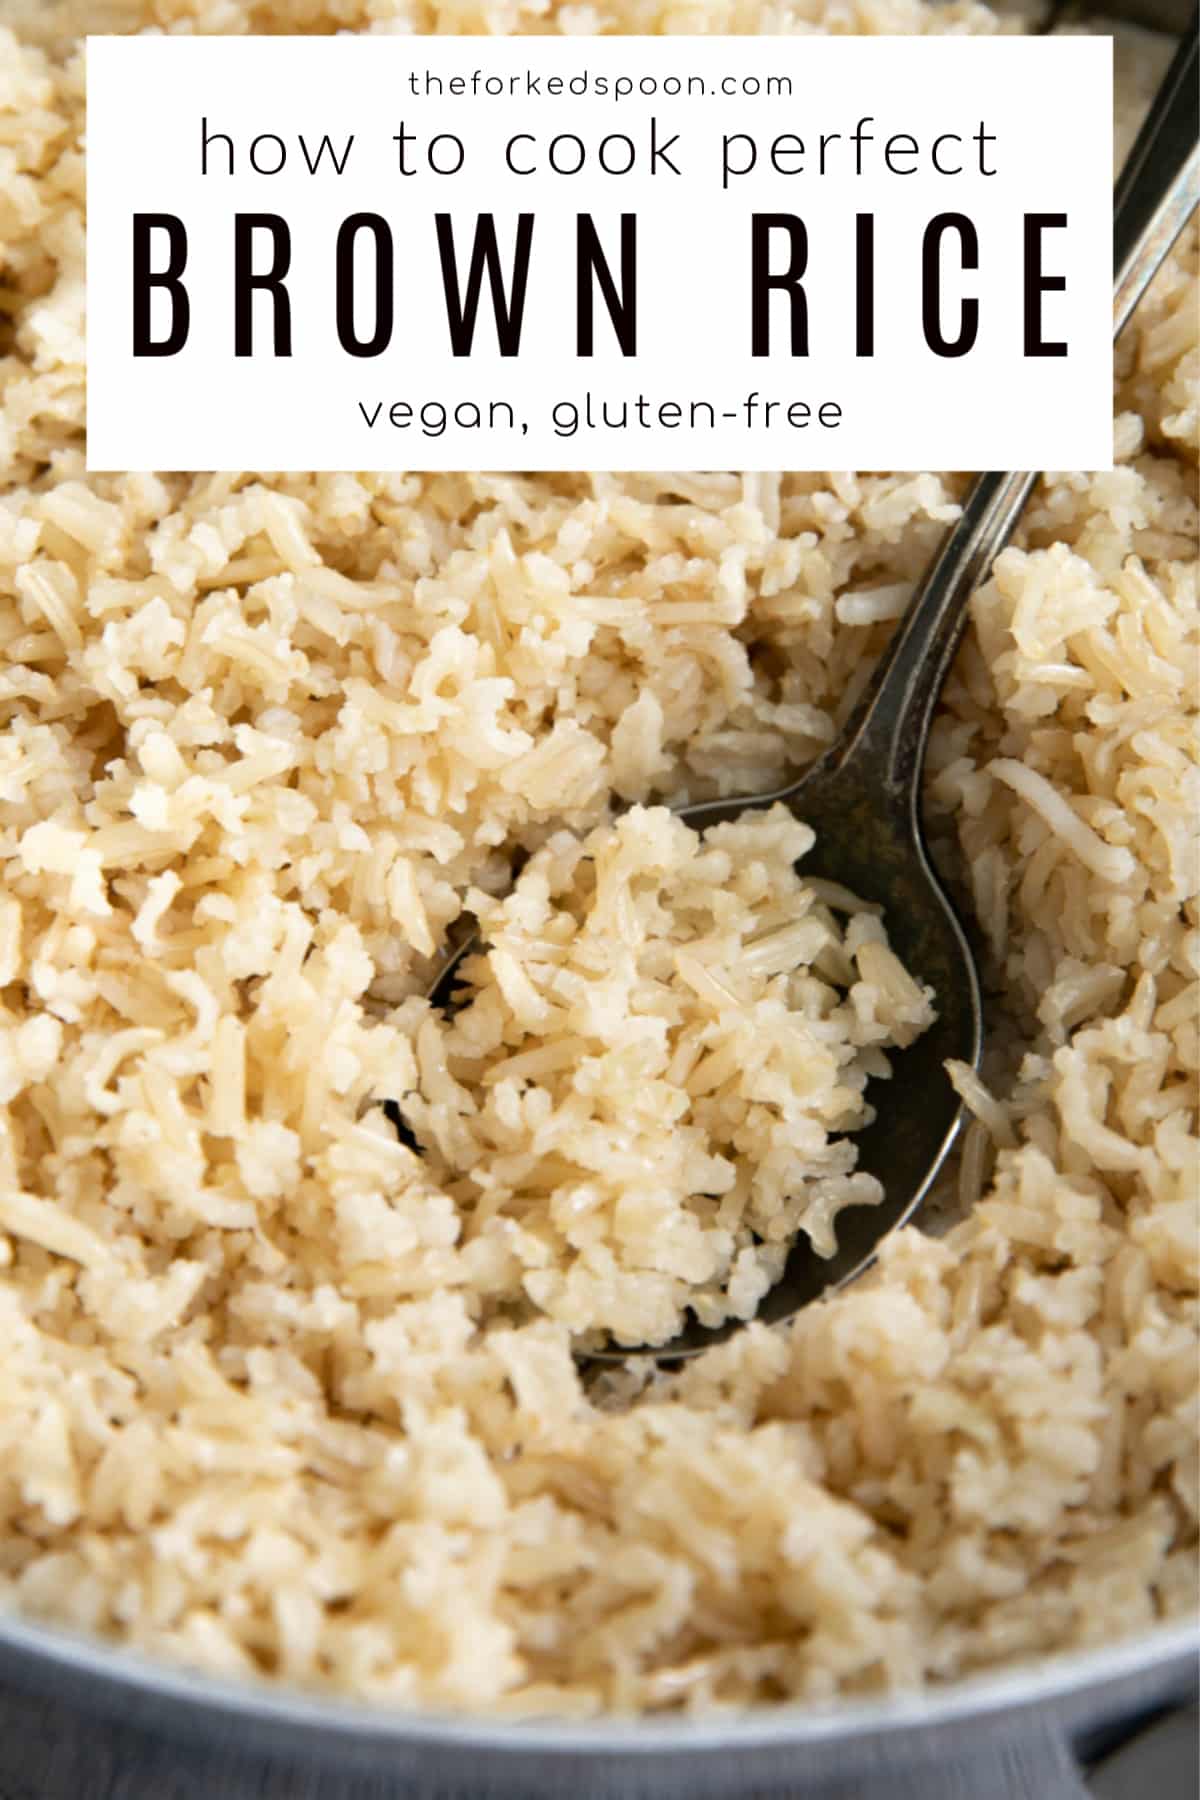 How to Cook Brown Rice (2 Ways!) - The Forked Spoon